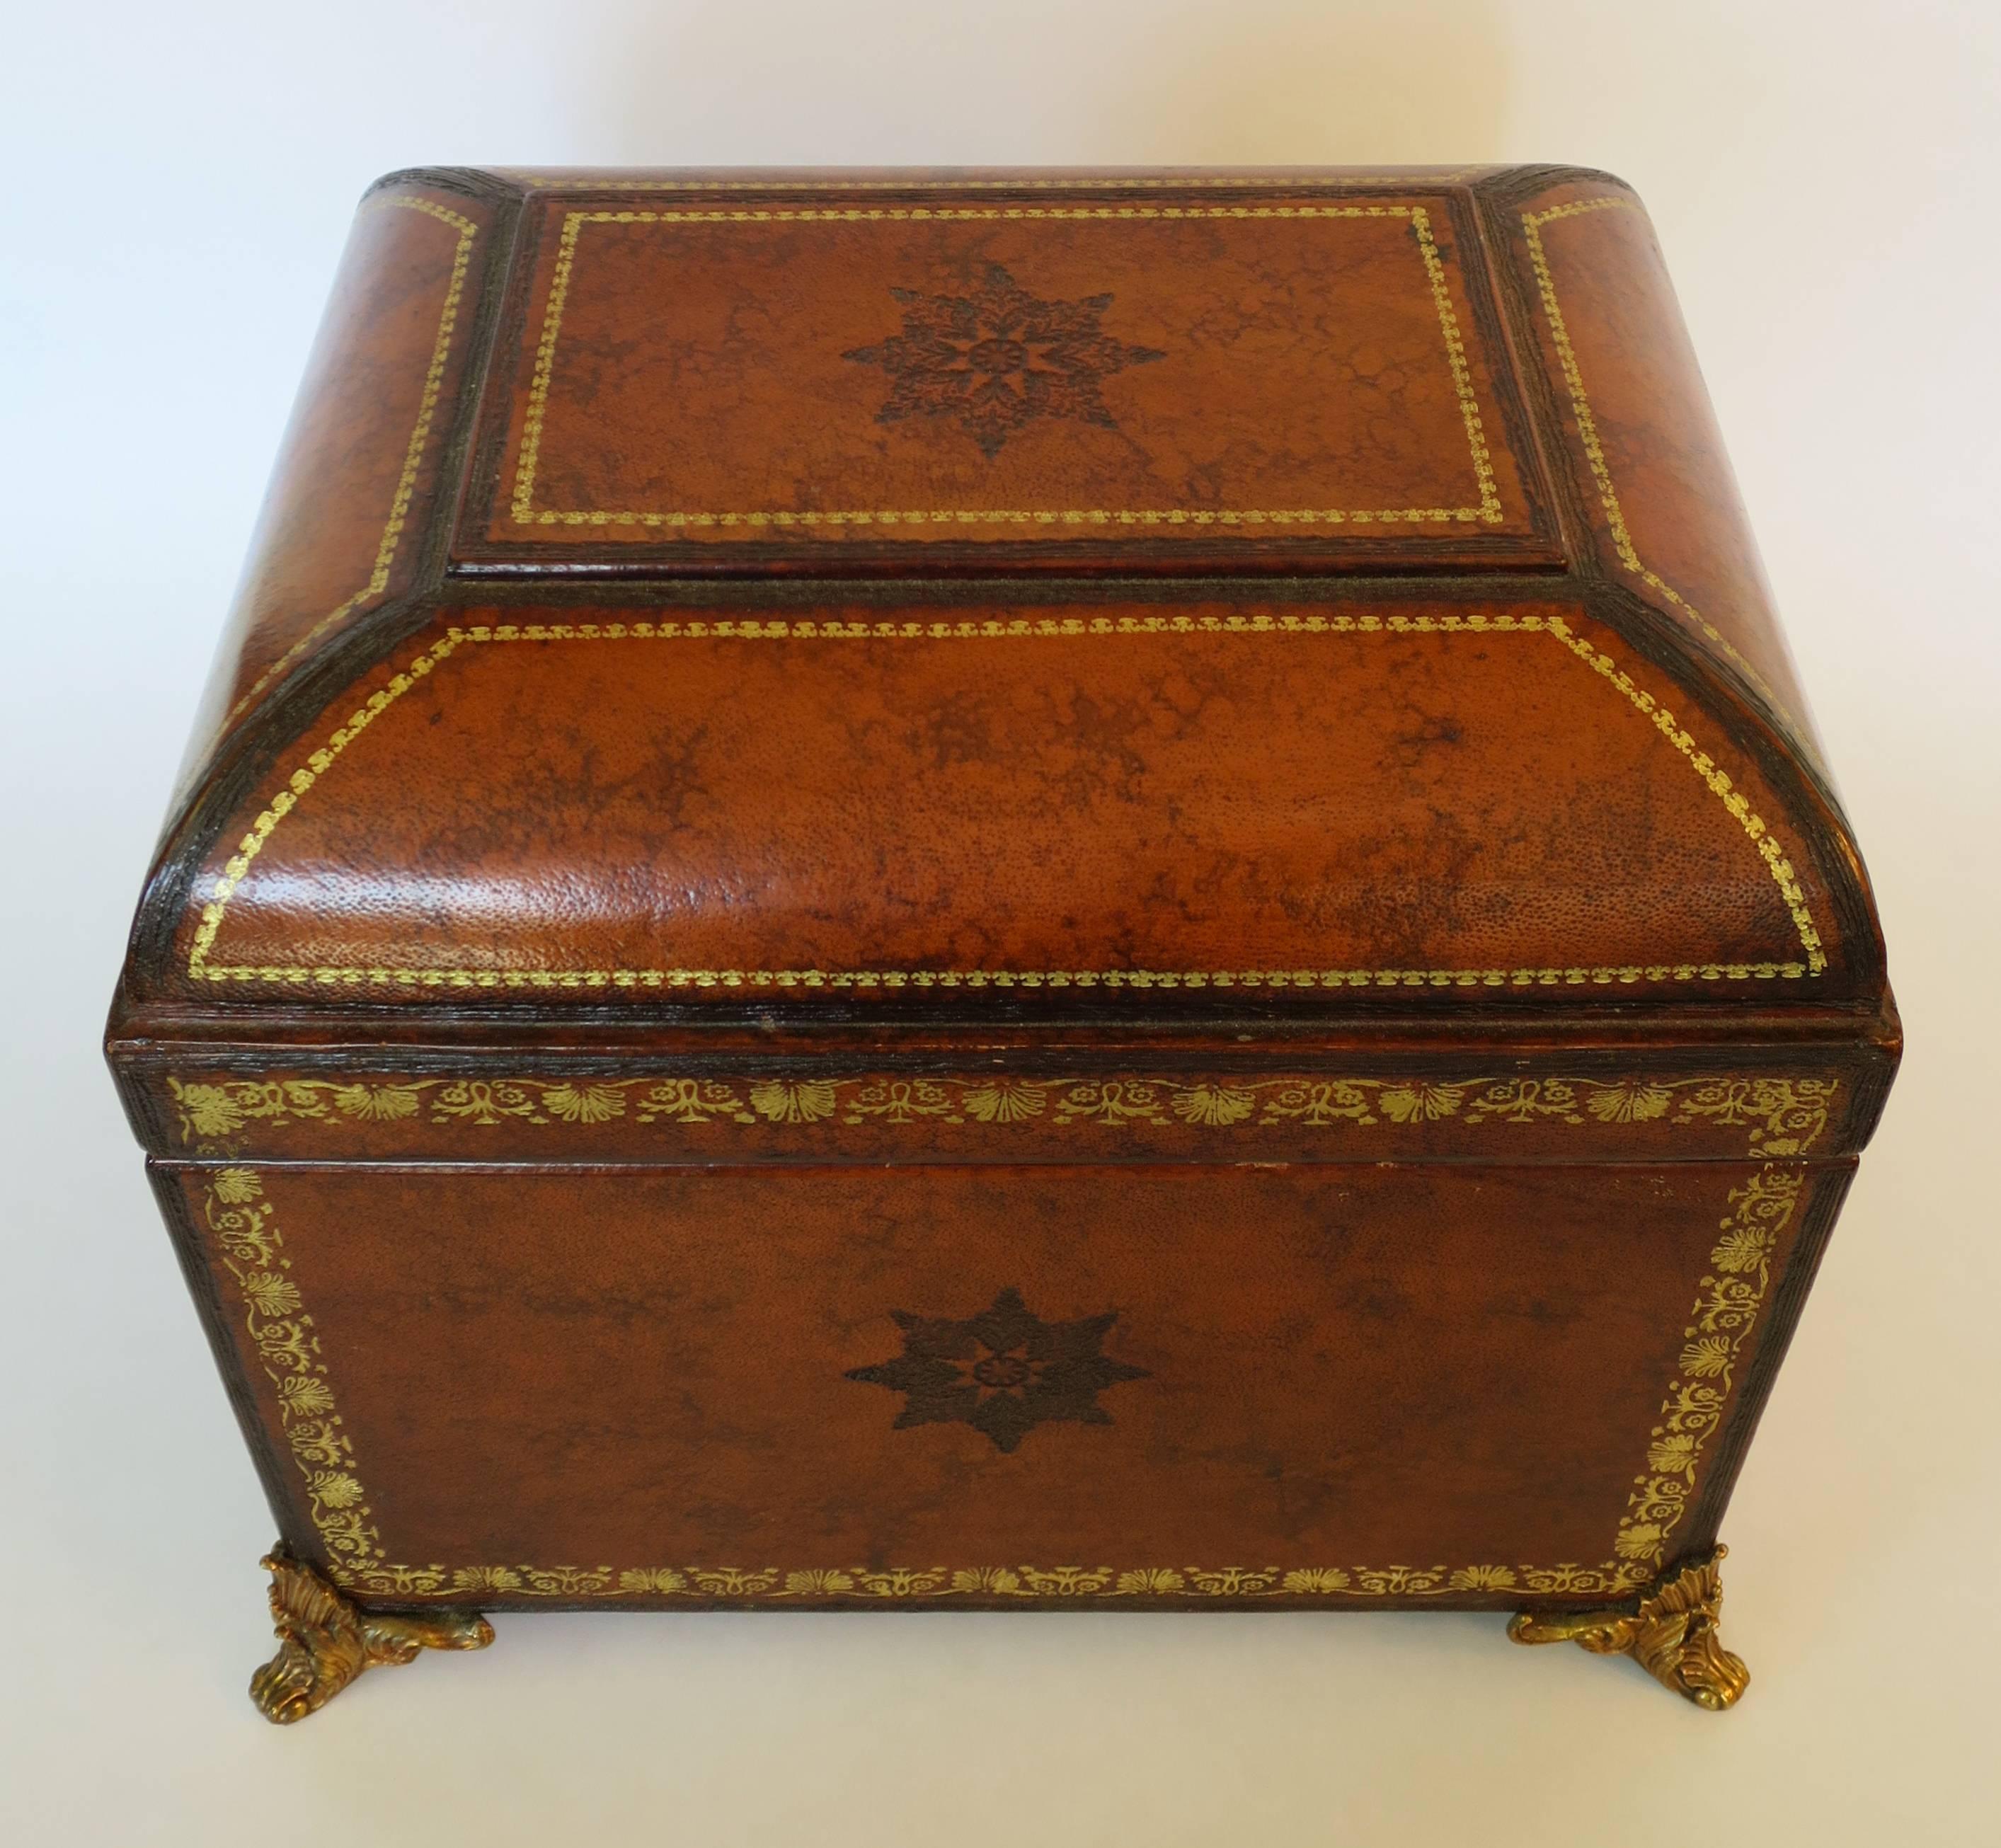 Maitland-Smith Leather-Wrapped Box with Solid Brass Ornate Feet, circa 1980s.